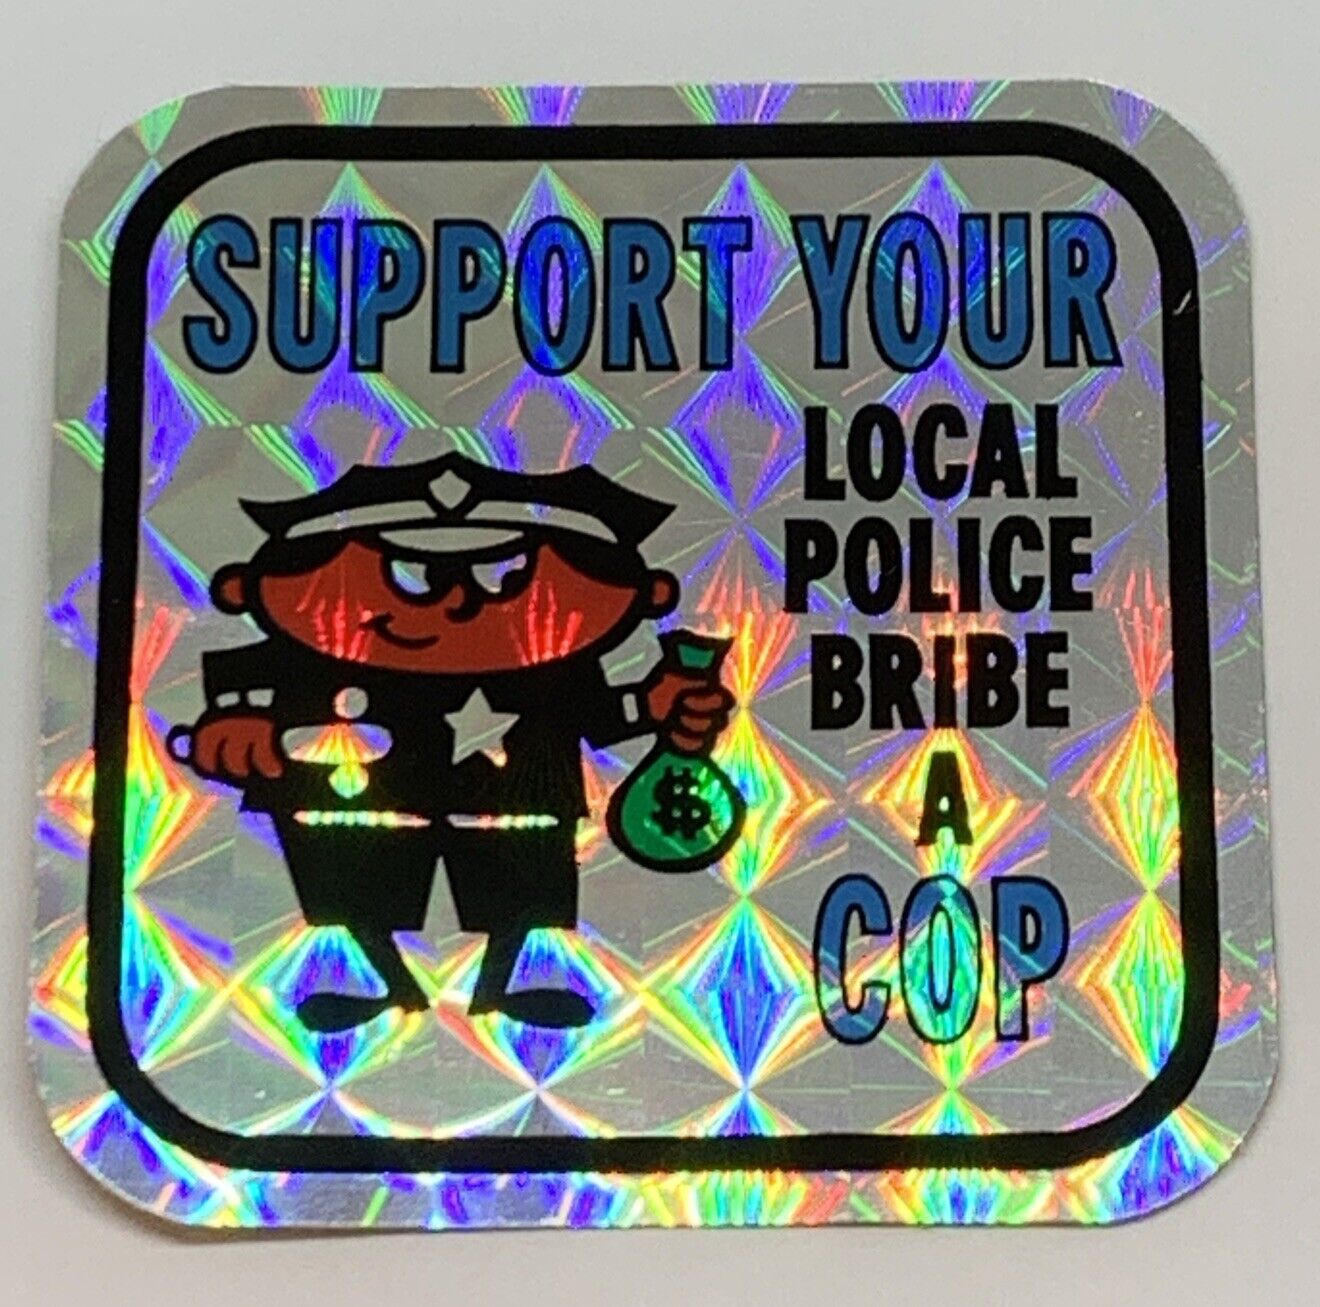 Vintage Support Your Local Police Bribe A Cop Prismatic Sticker Vending Machine